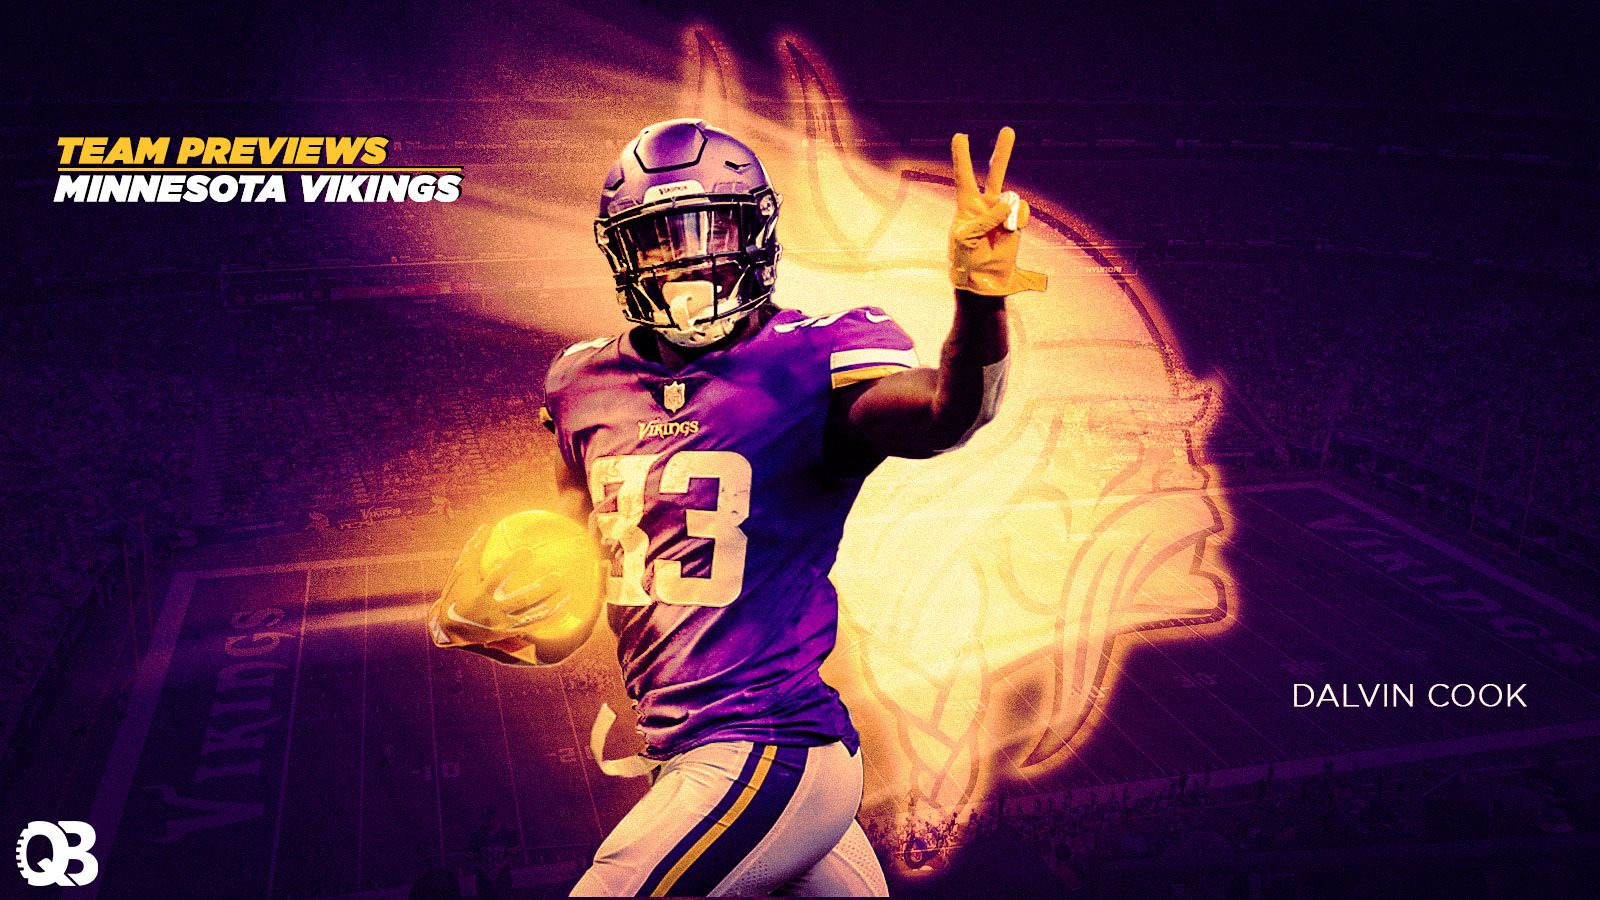 I turned my Justin Jefferson digital drawing into a wallpaper if anyone  wants to use it  rminnesotavikings